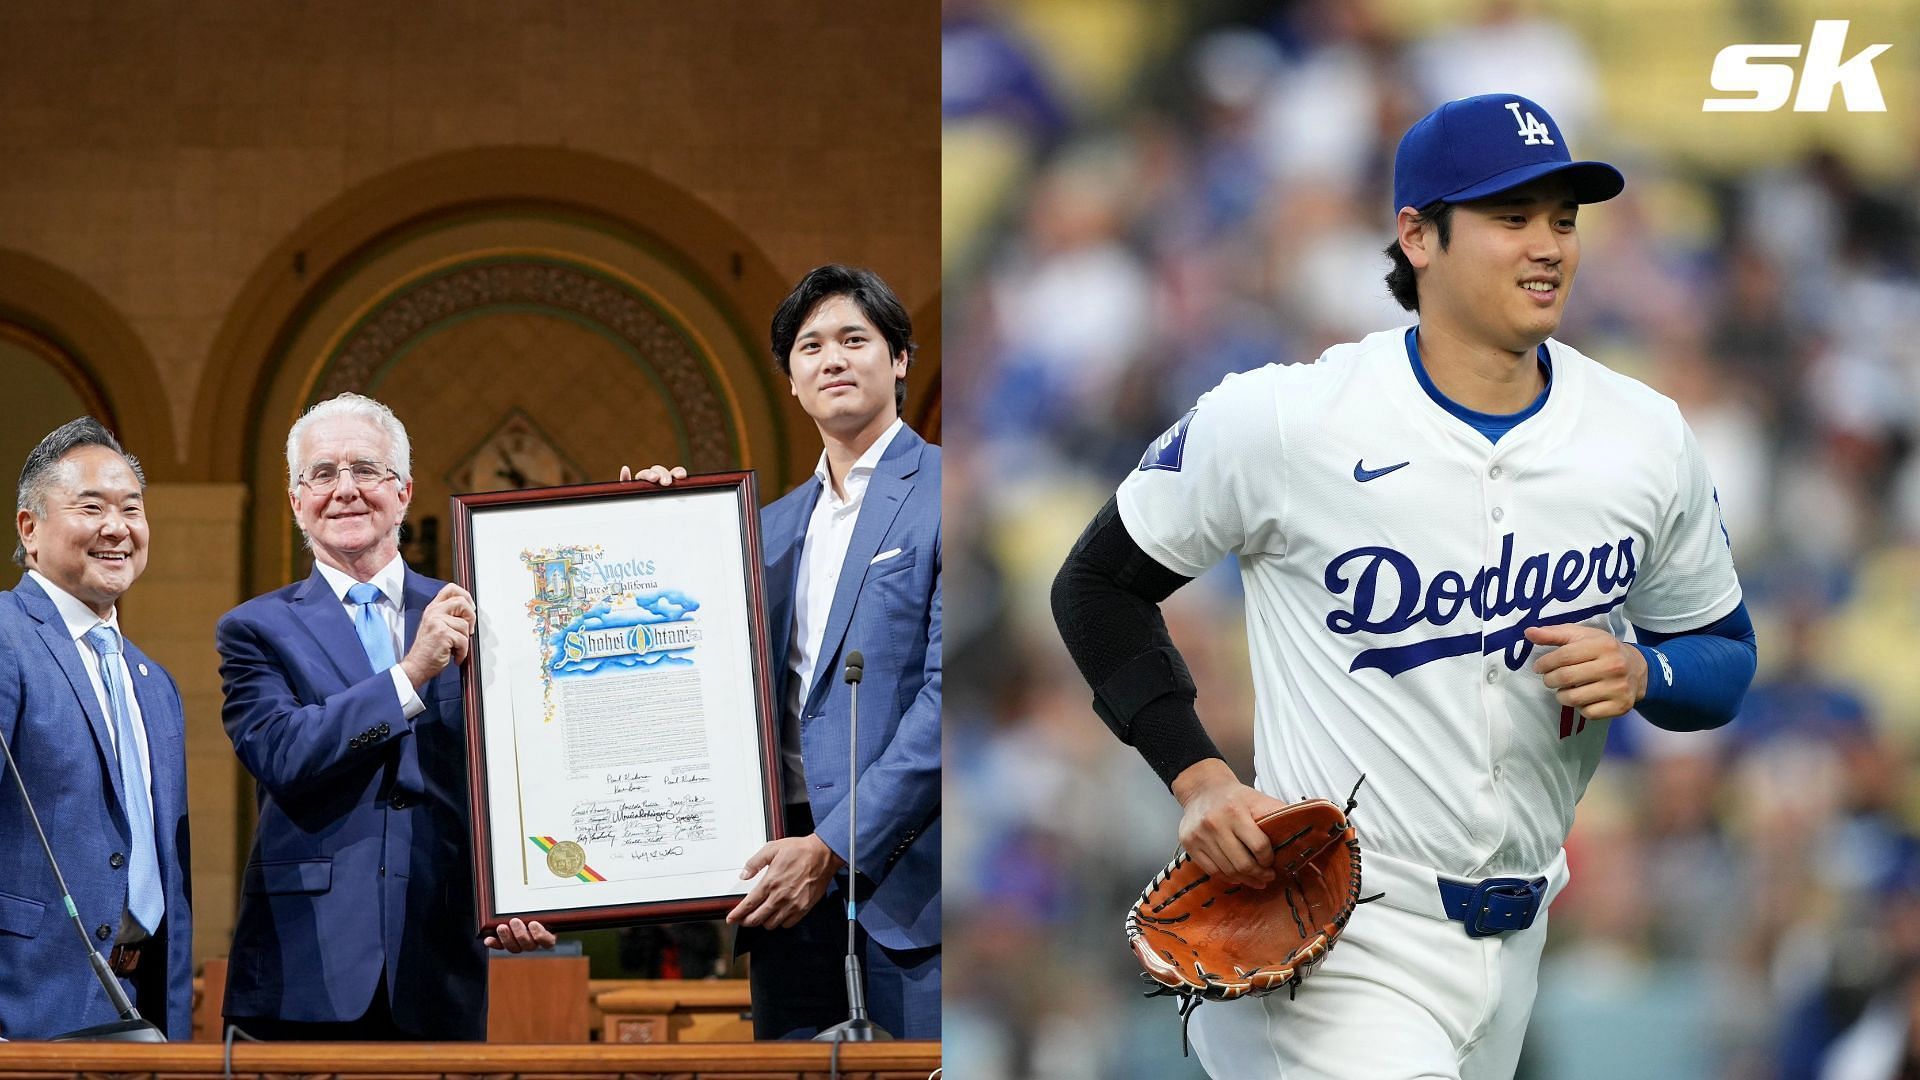 The city of Los Angeles has declared May 17th as Shohei Ohtani Day to honor the superstar